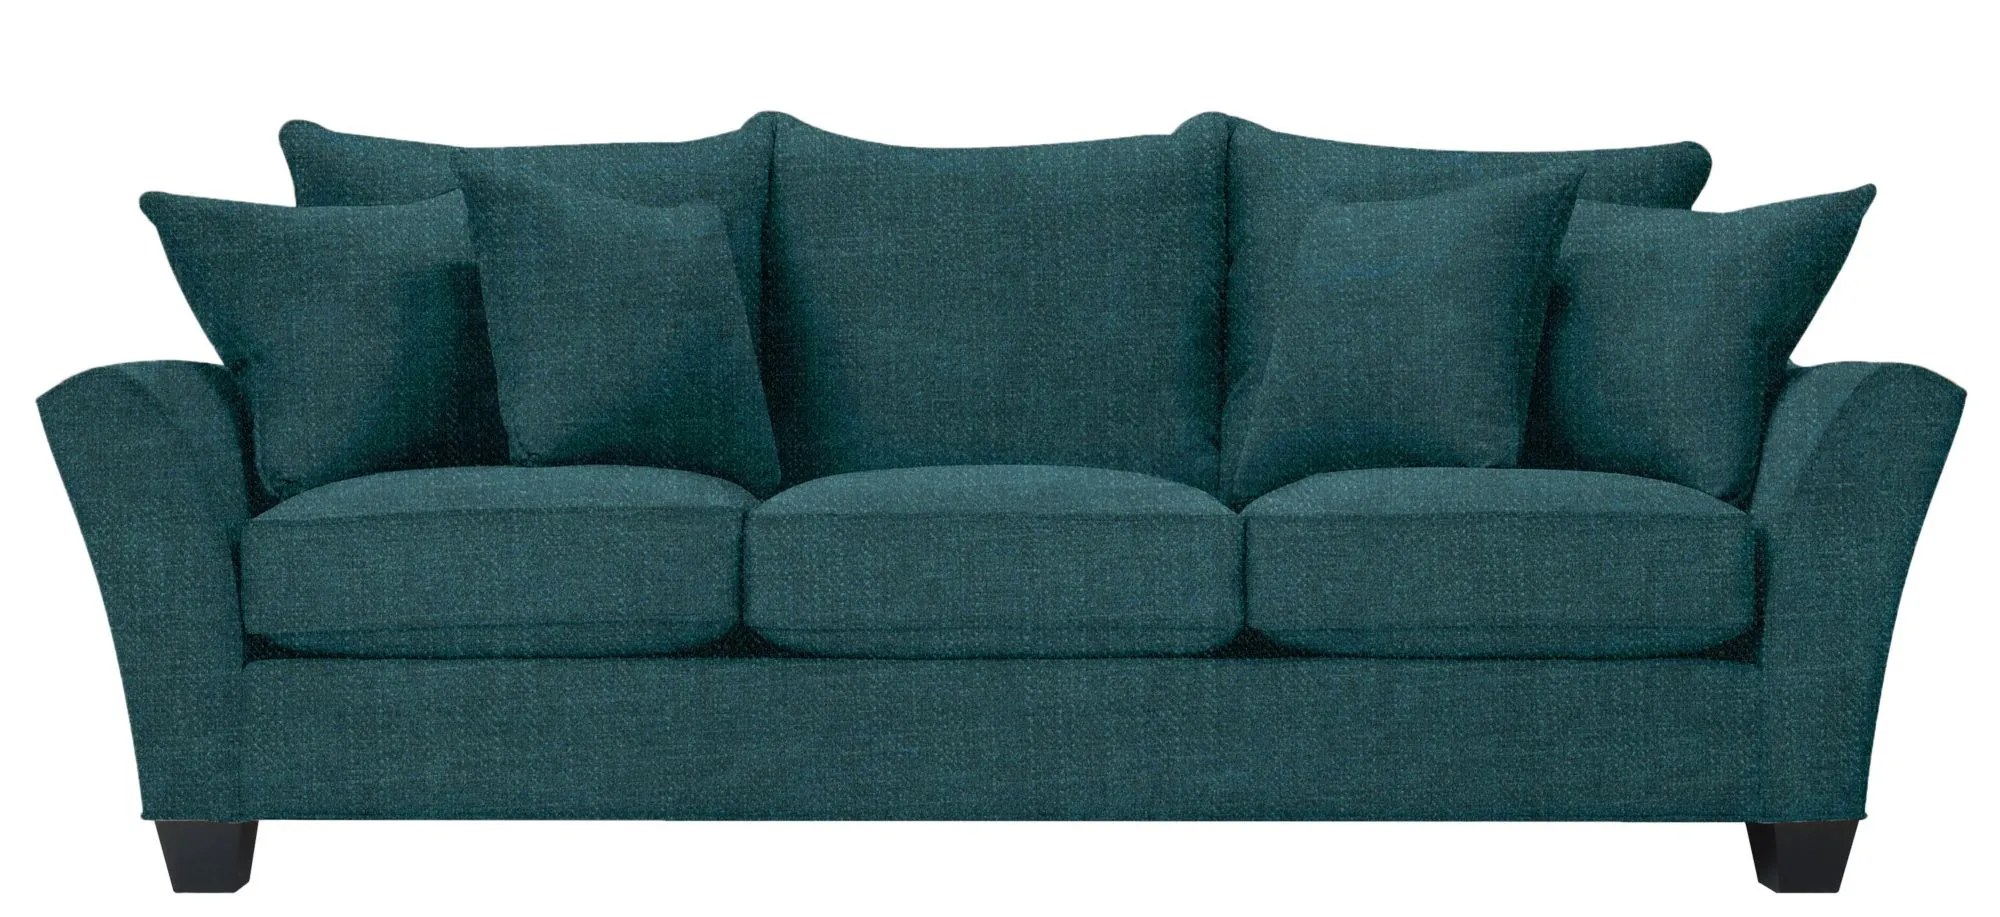 Briarwood Sofa in Elliot Teal by H.M. Richards